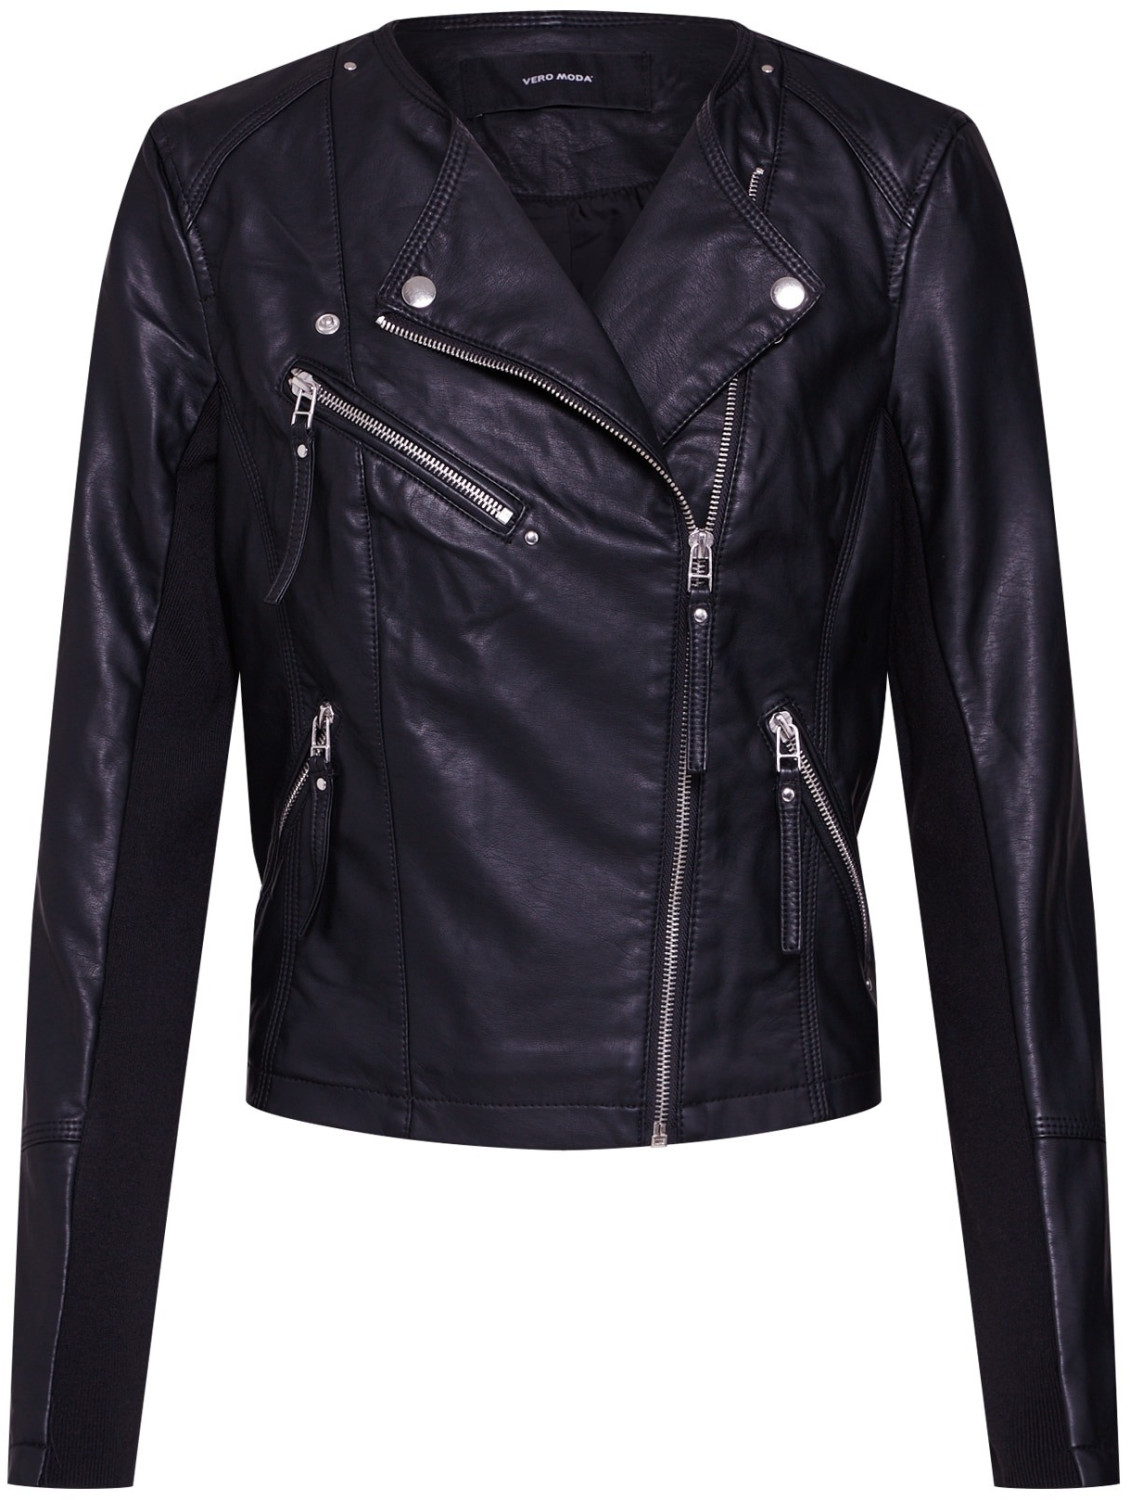 Buy Vero Moda Ria Faux Leather Jacket (10211420) black from £21.99 ...